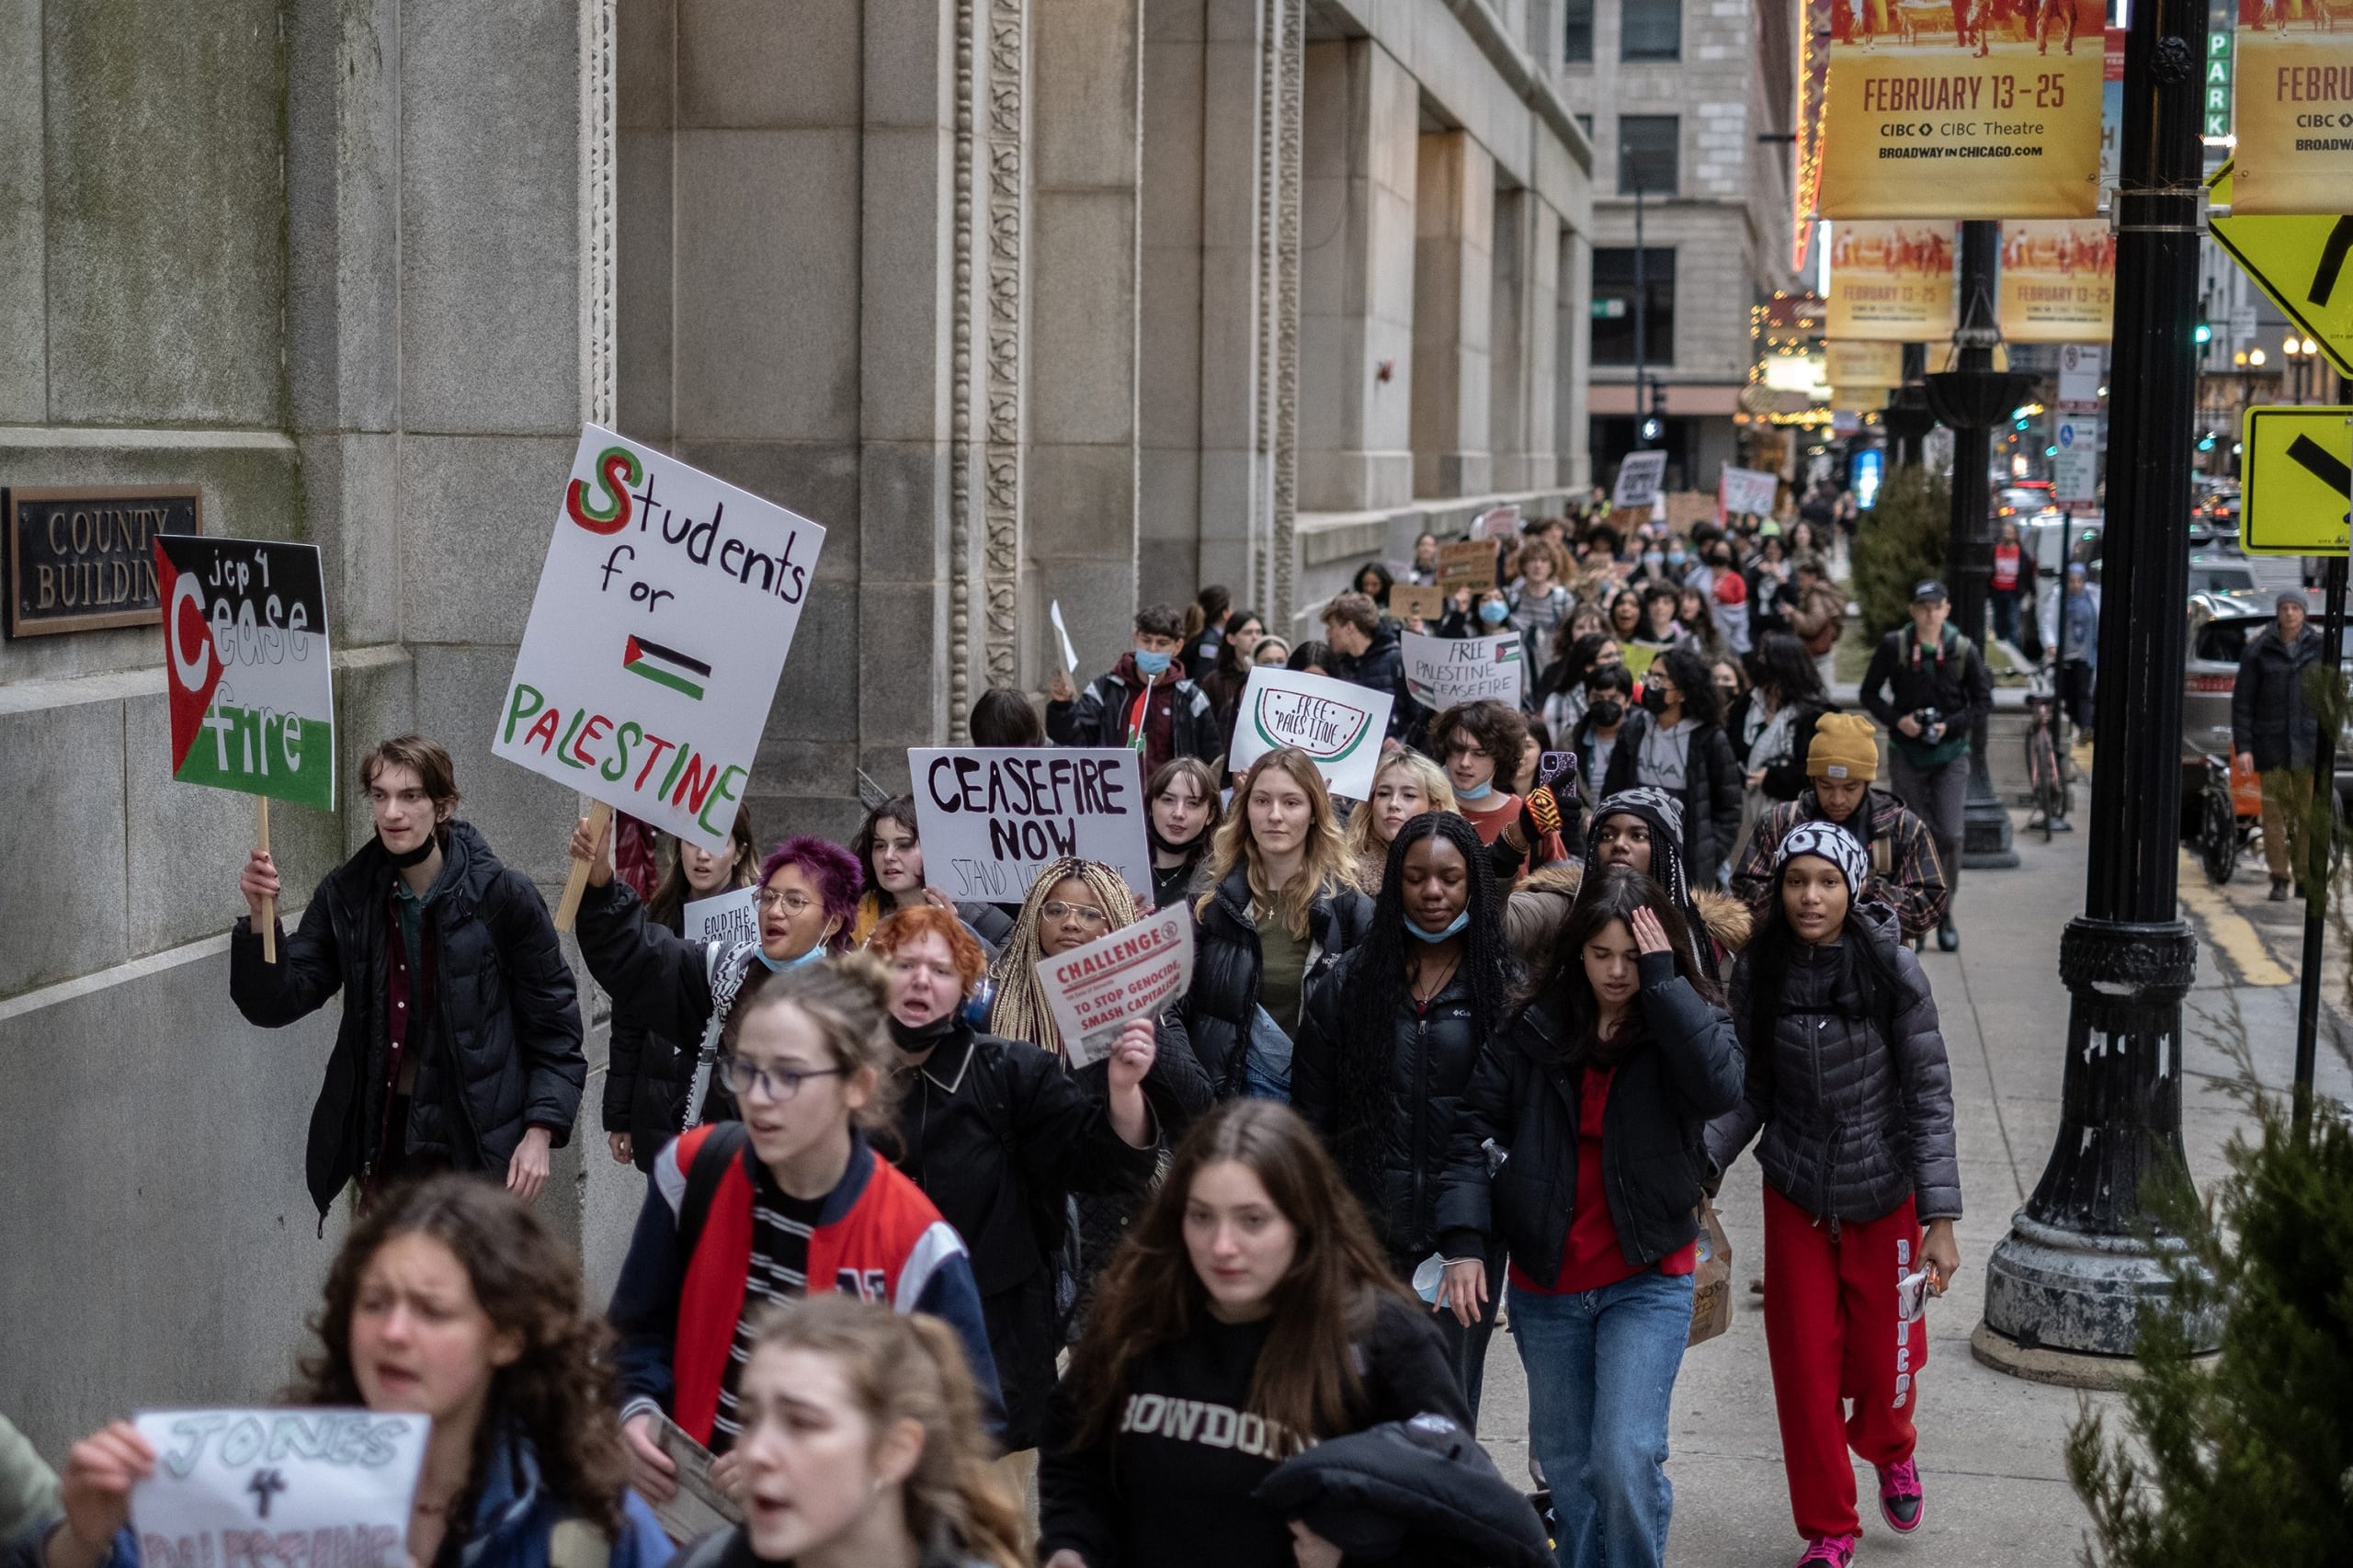 A mass of high school students walkout during a protest and march along a sidewalk. Some are holding signs.